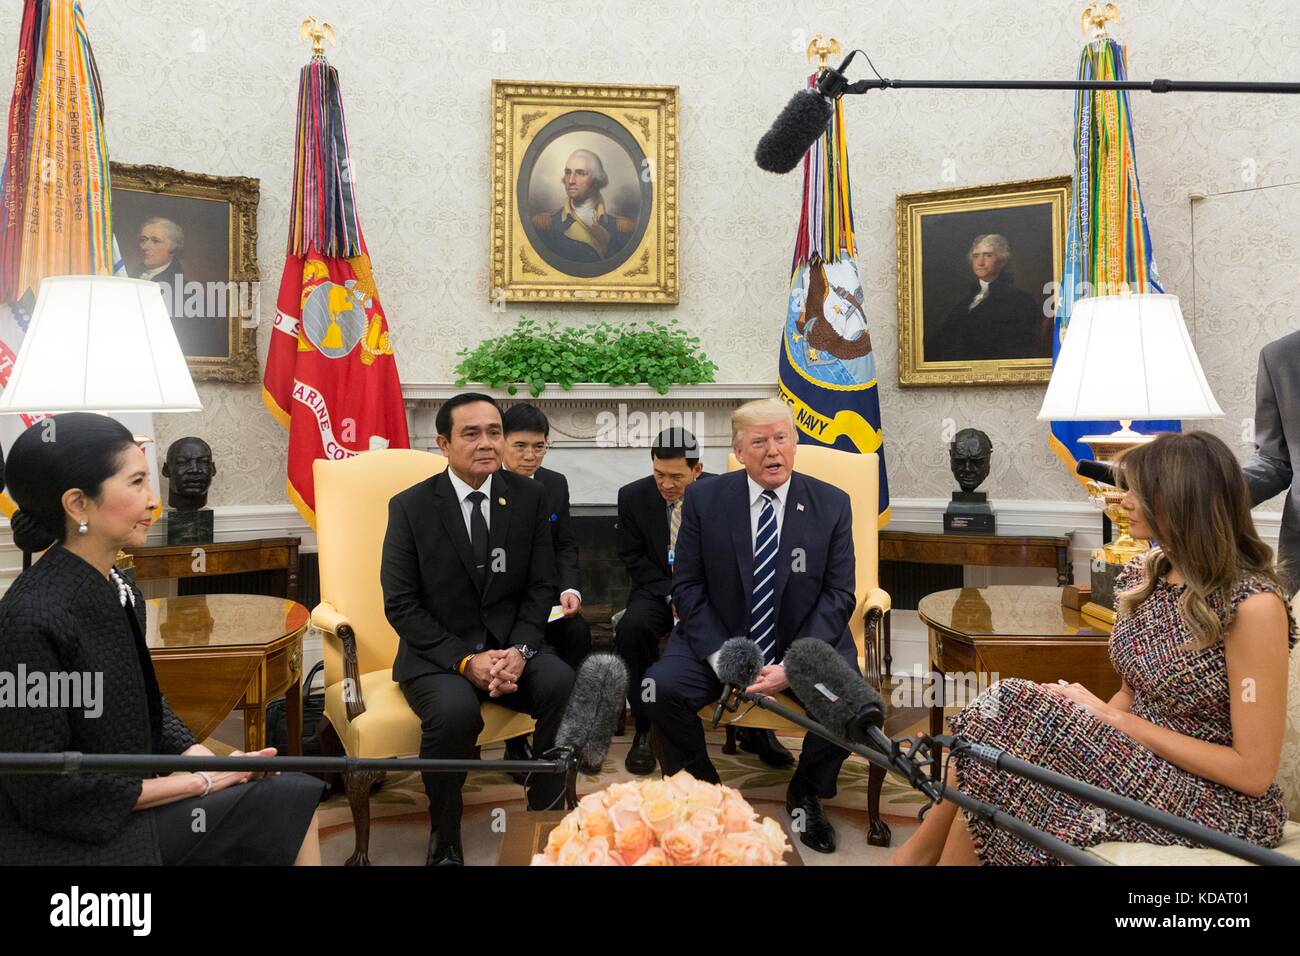 U.S. President Donald Trump and First Lady Melania Trump during a meeting with Thai Prime Minister Pryut Chan-o-Cha and his wife Naraporn Chan-o-Cha in the Oval Office of the White House October 2, 2017 in Washington, DC. Stock Photo